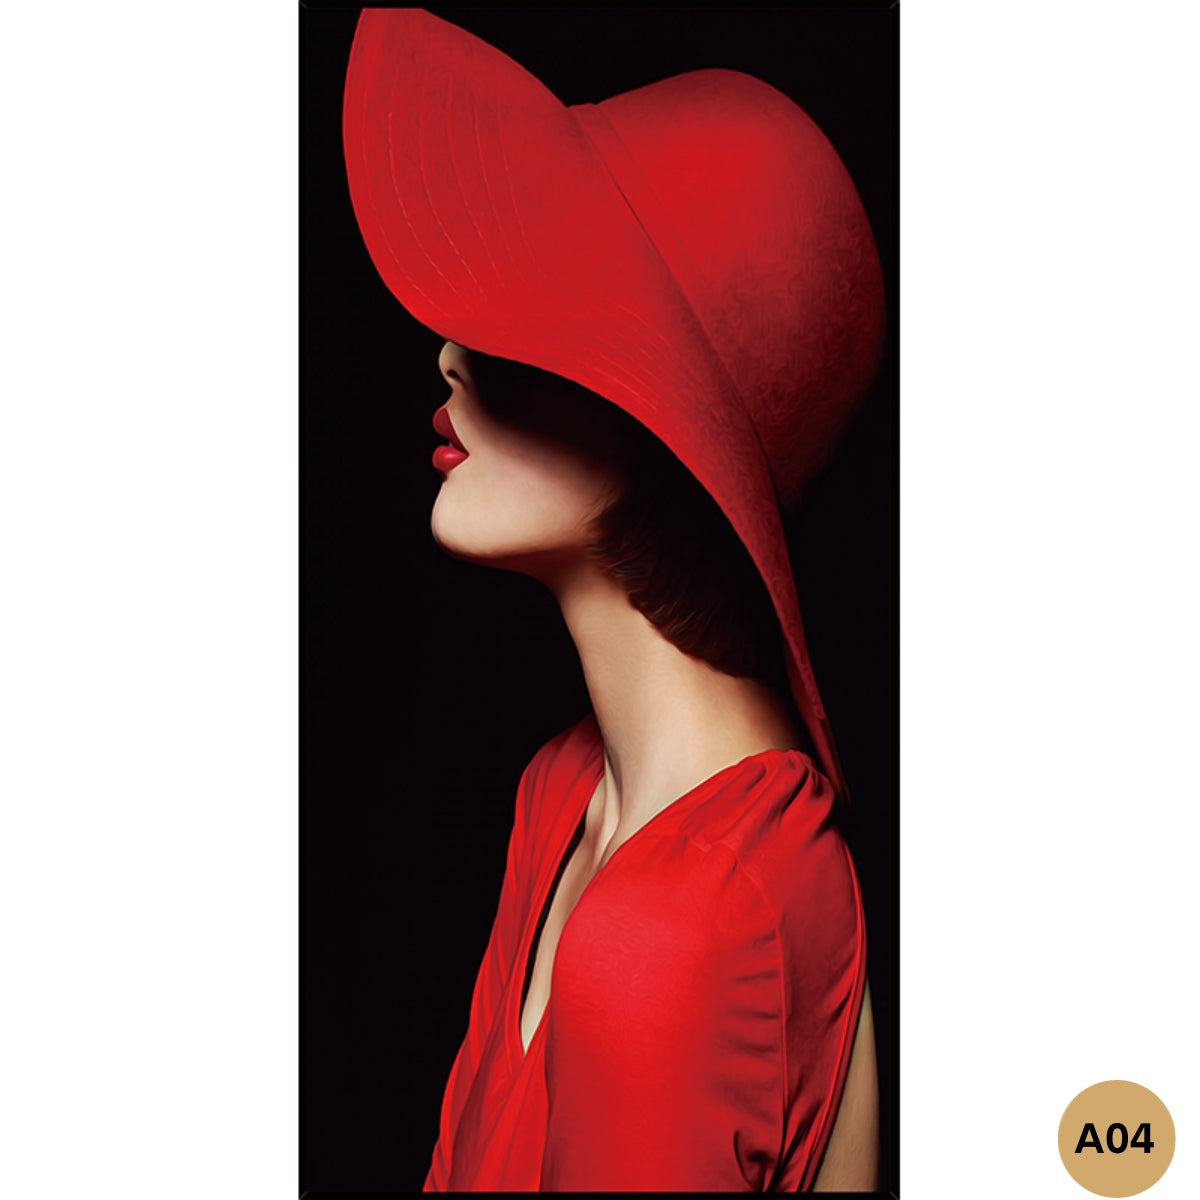 Brand New Modern Red Hat Woman Large Wall Art Wall Decor Painting Canvas Stainless Steel Frame